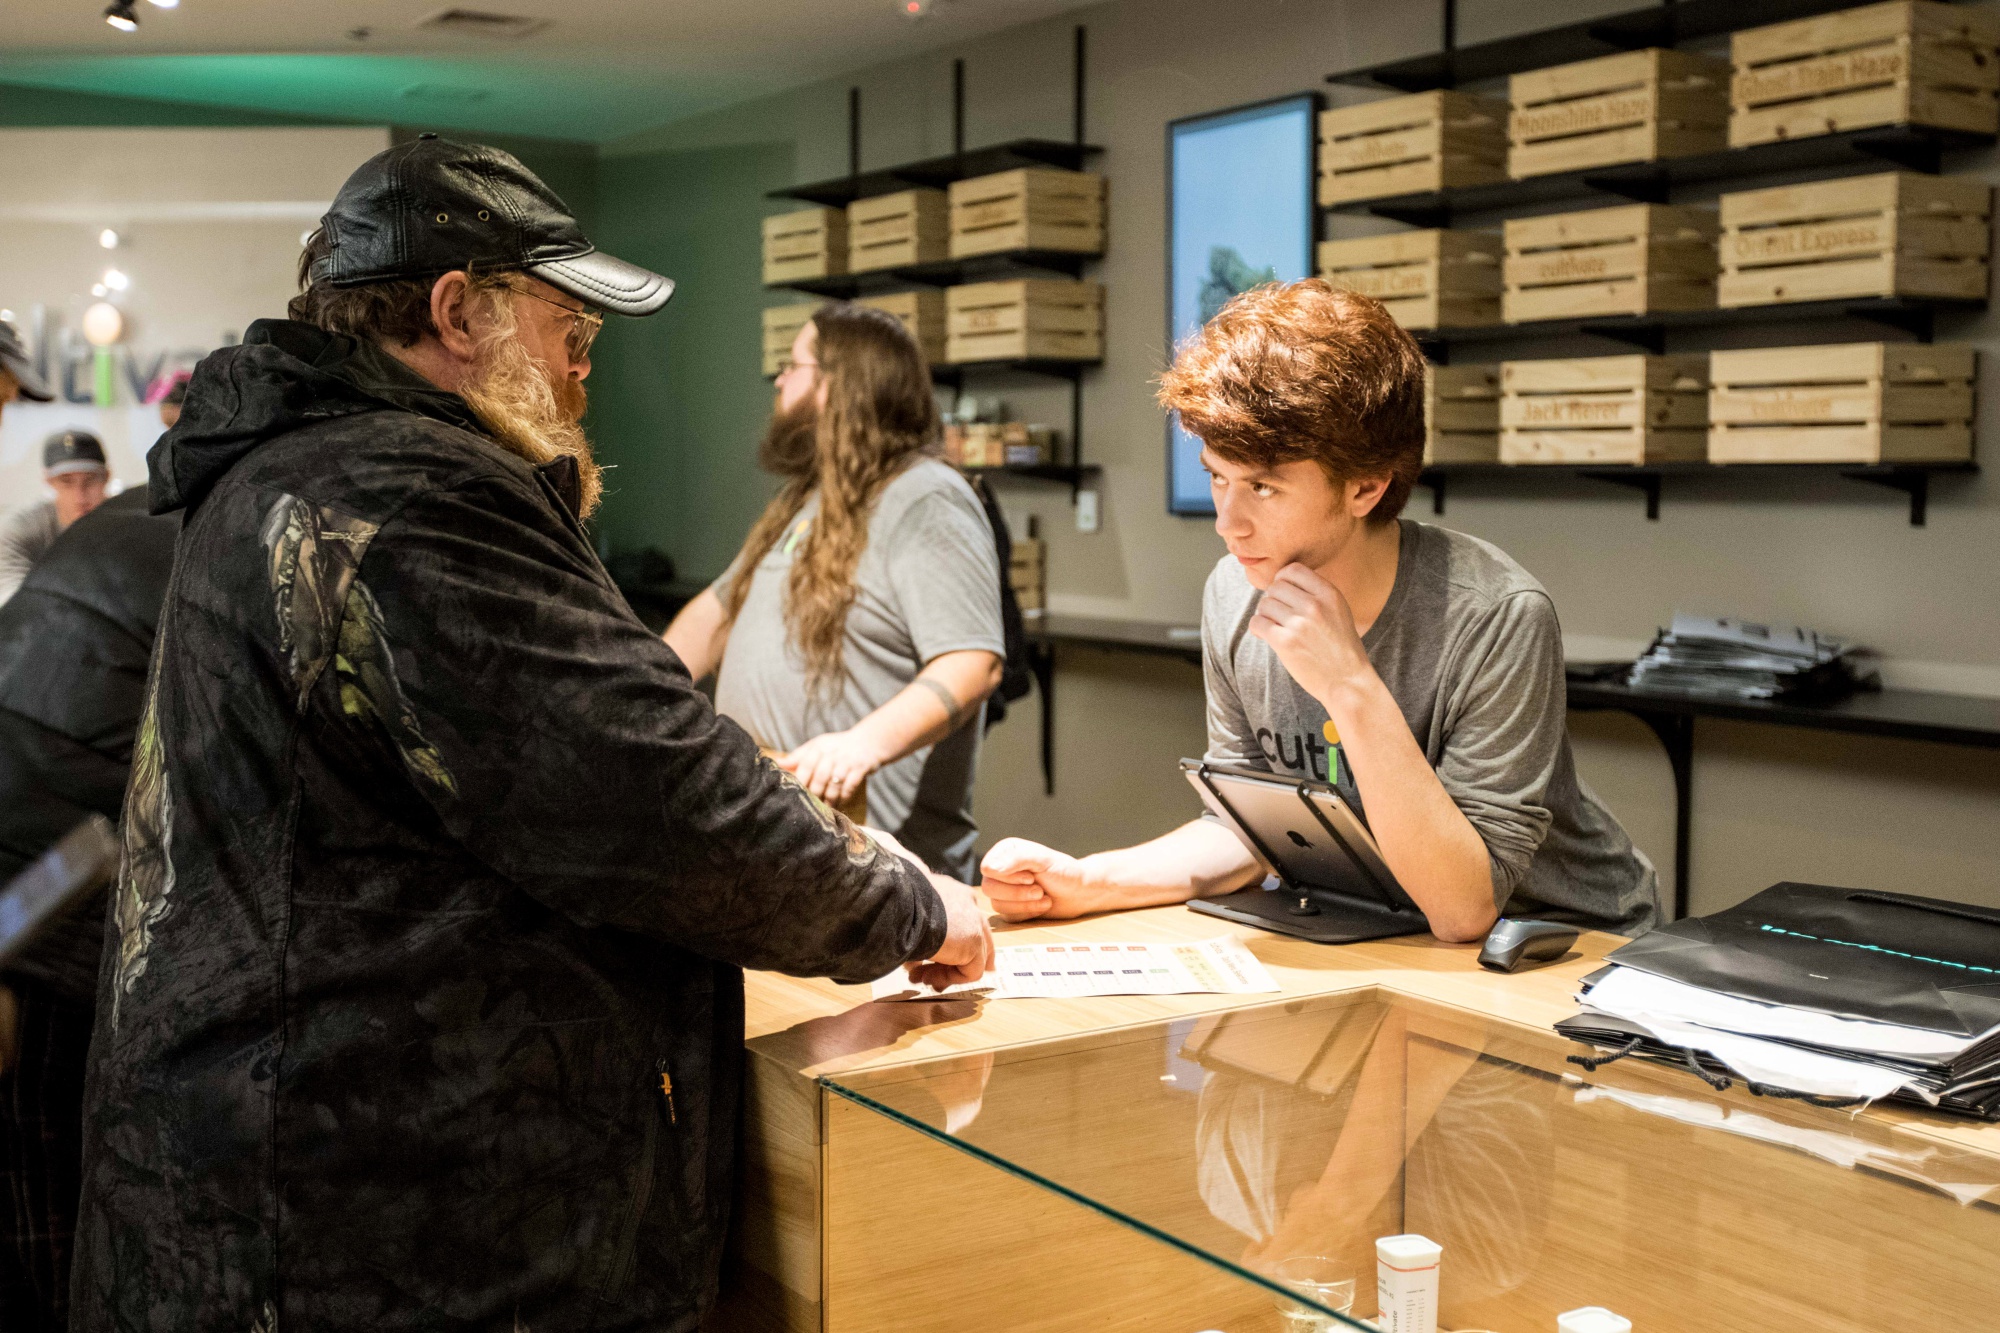 An employee helps a customer at a cannabis dispensary in Leicester, Massachusetts.